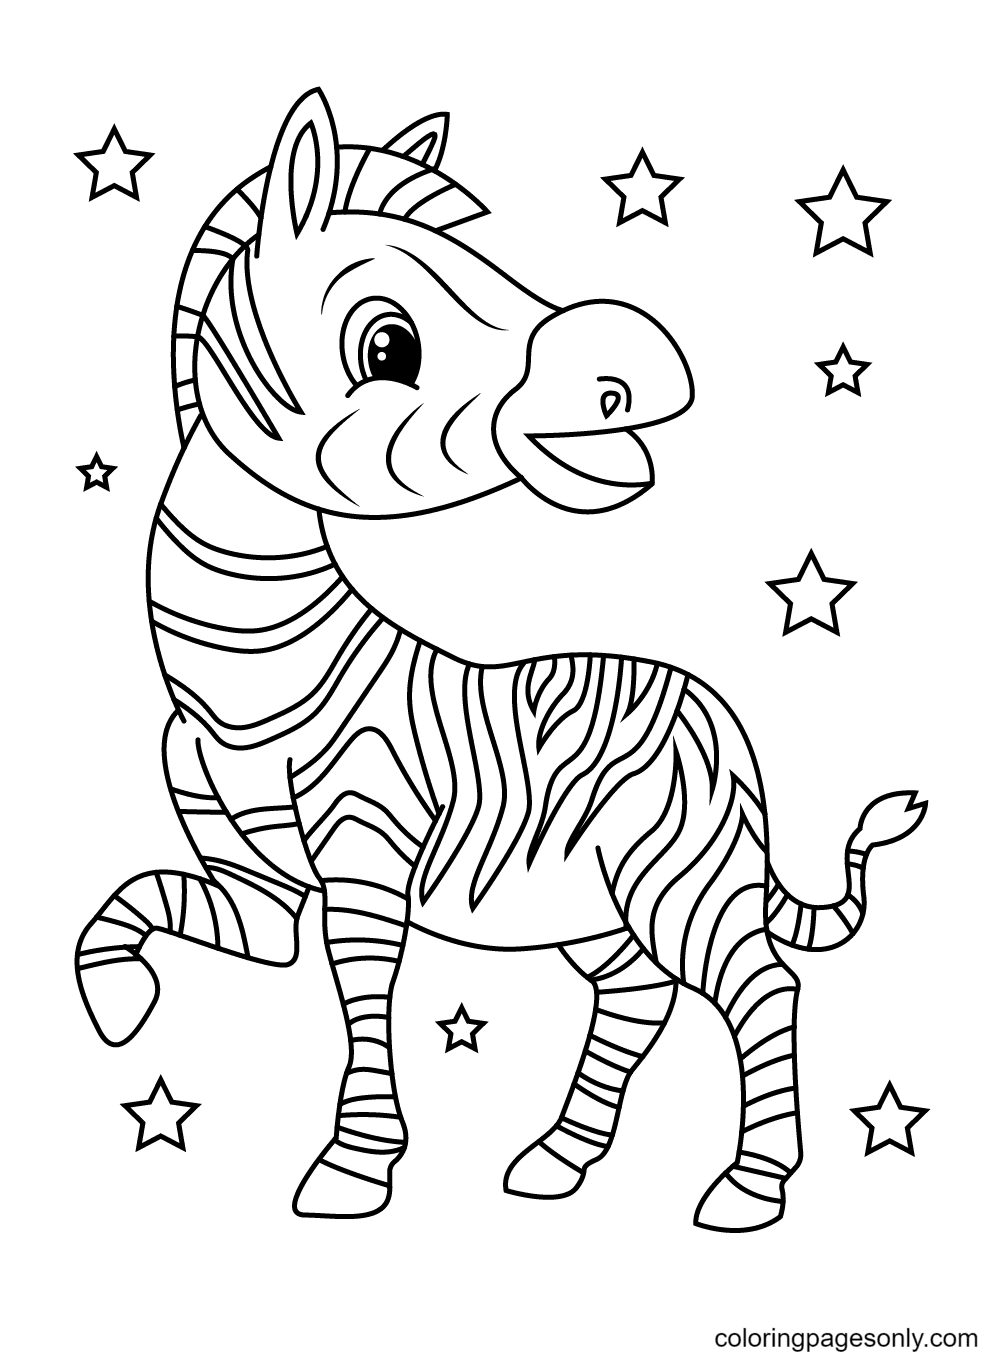 Zebra Surrounded by Stars Coloring Page